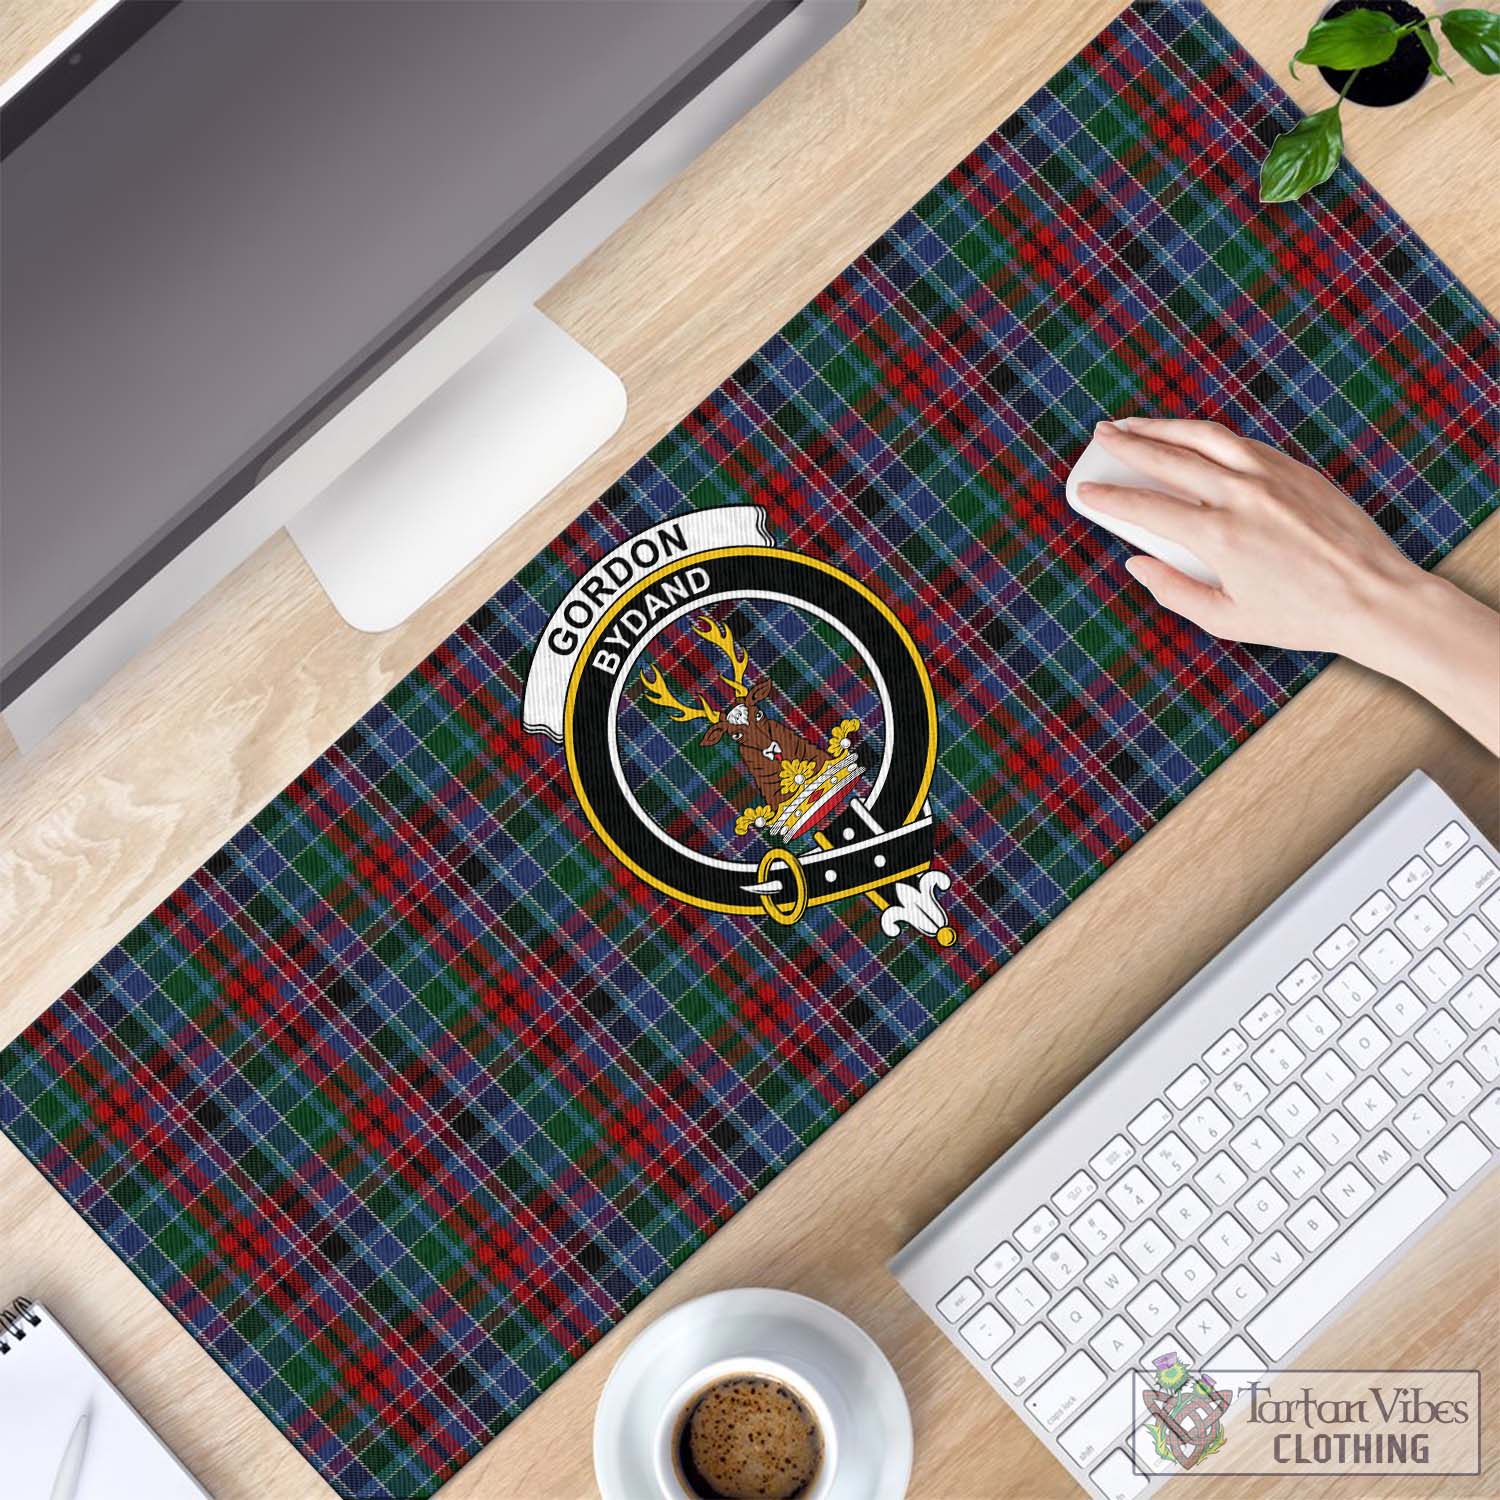 Tartan Vibes Clothing Gordon Red Tartan Mouse Pad with Family Crest